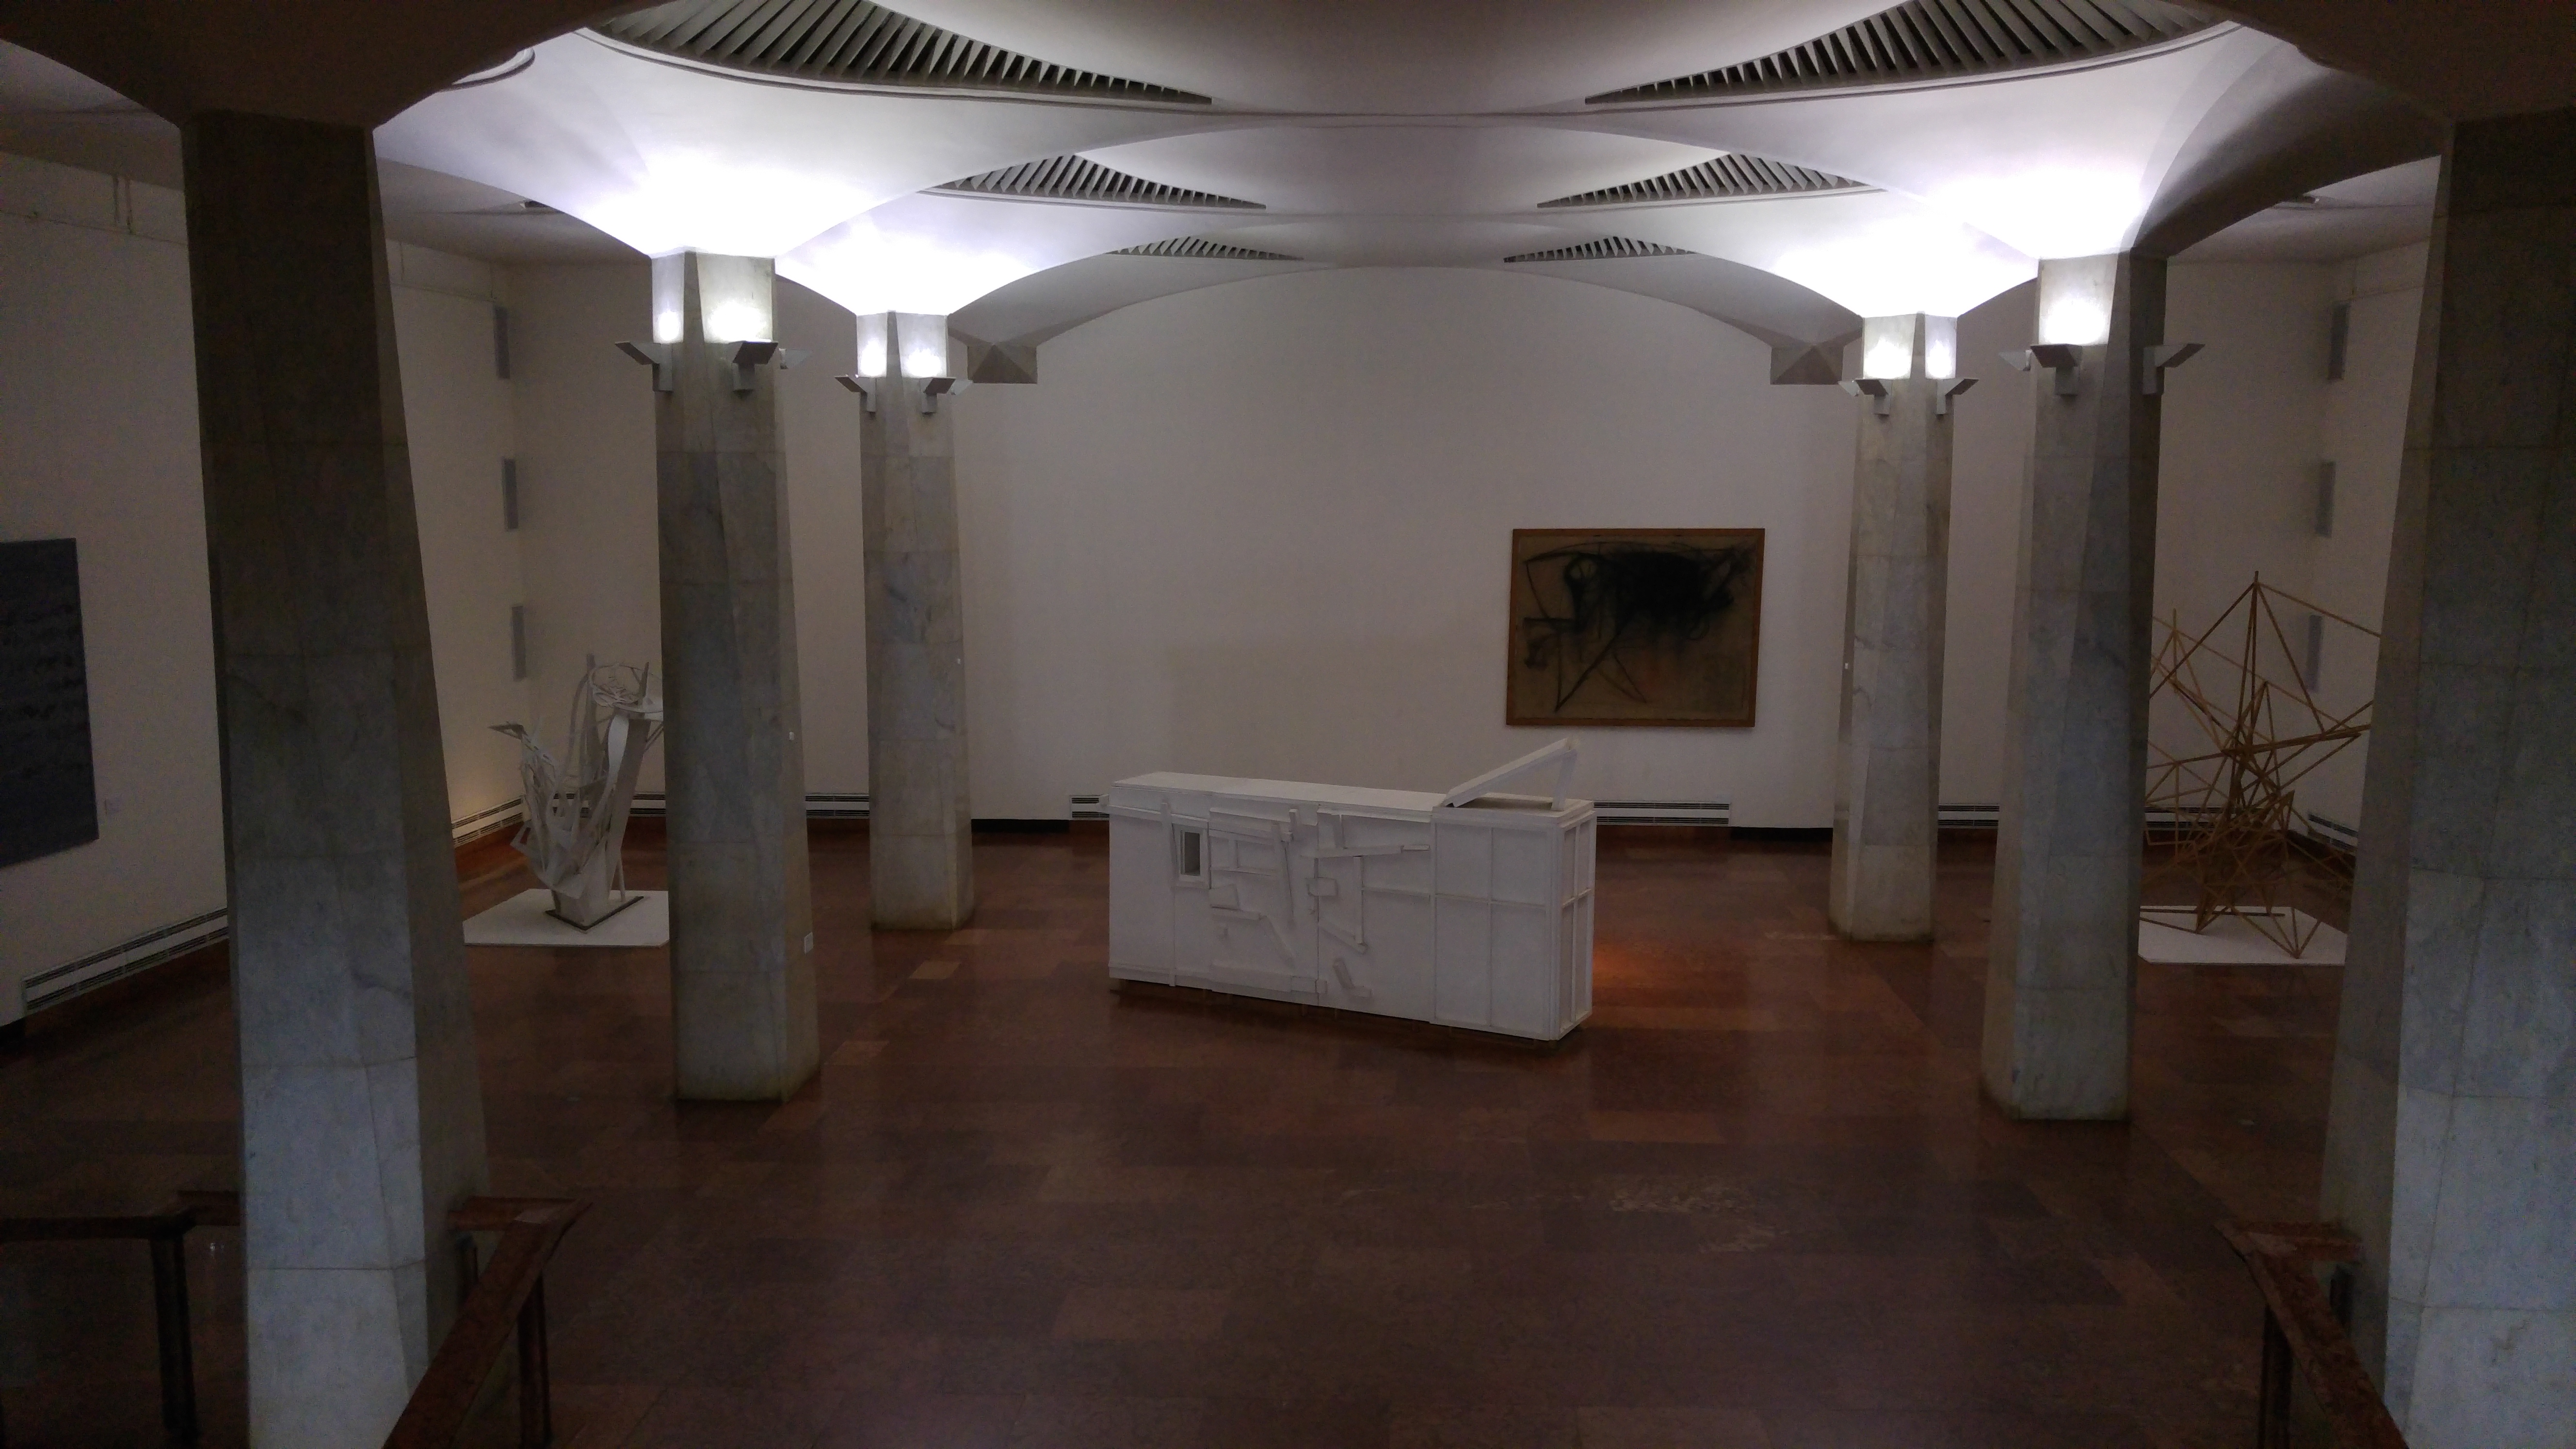 Detail of the interieur of the Hungarian National Gallery, part of the permanent exhibition of the Contemporary Collection, with works of Tibor Szalai, György Jovánovics, Béla Kondor and János Megyik.